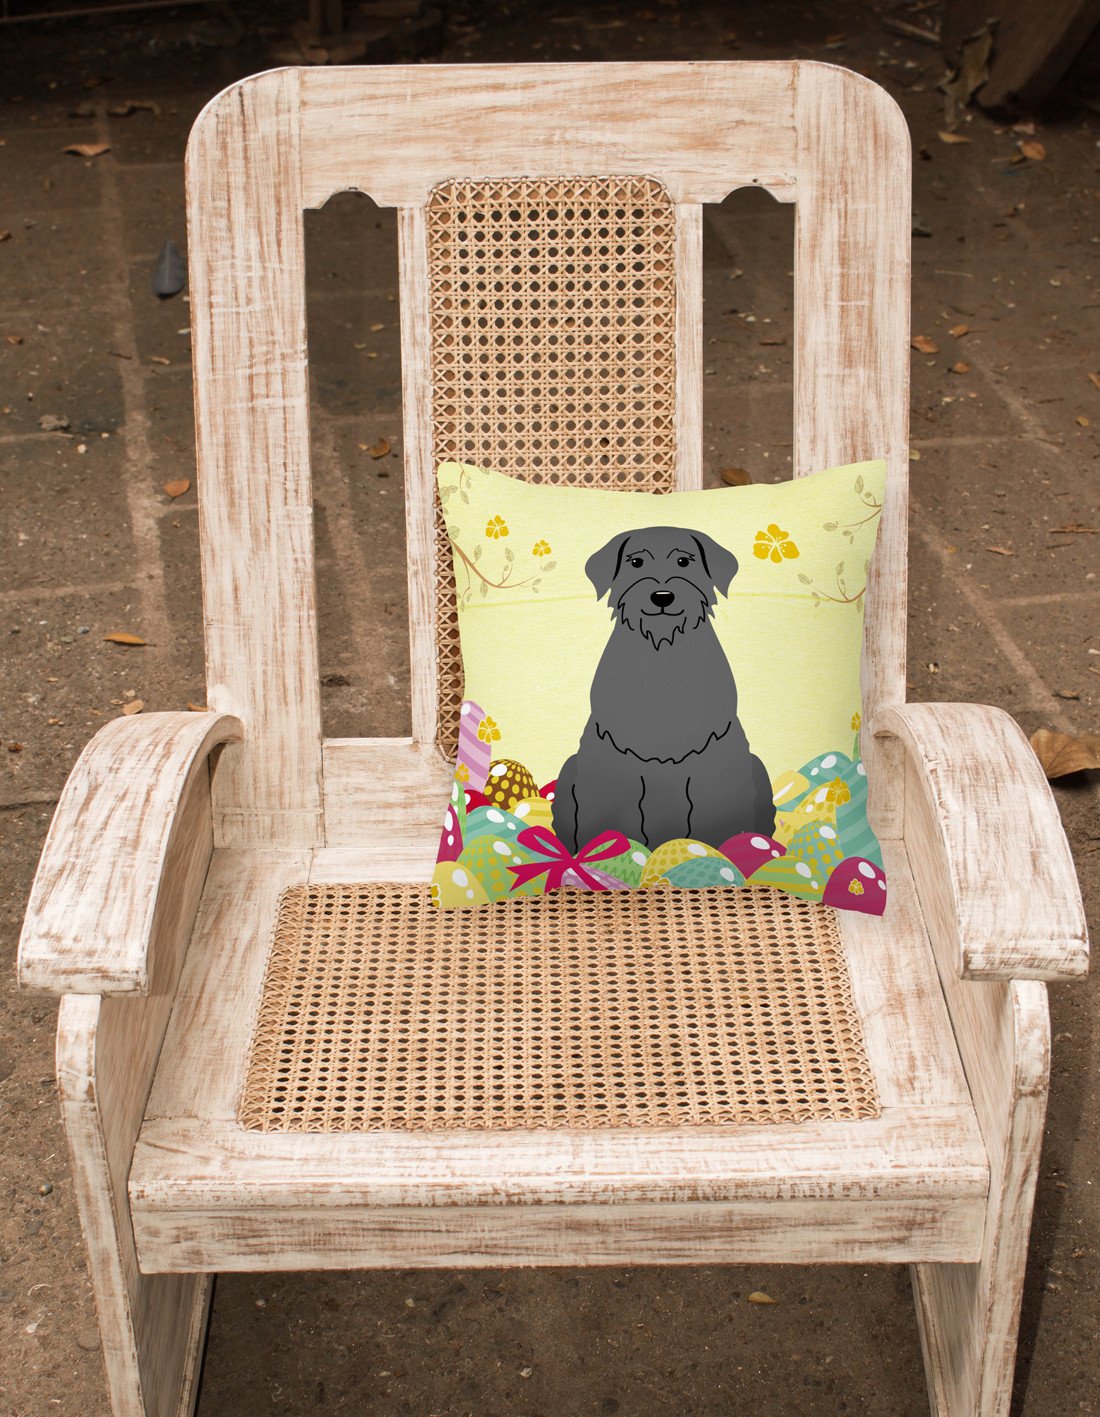 Easter Eggs Giant Schnauzer Fabric Decorative Pillow BB6066PW1818 by Caroline's Treasures